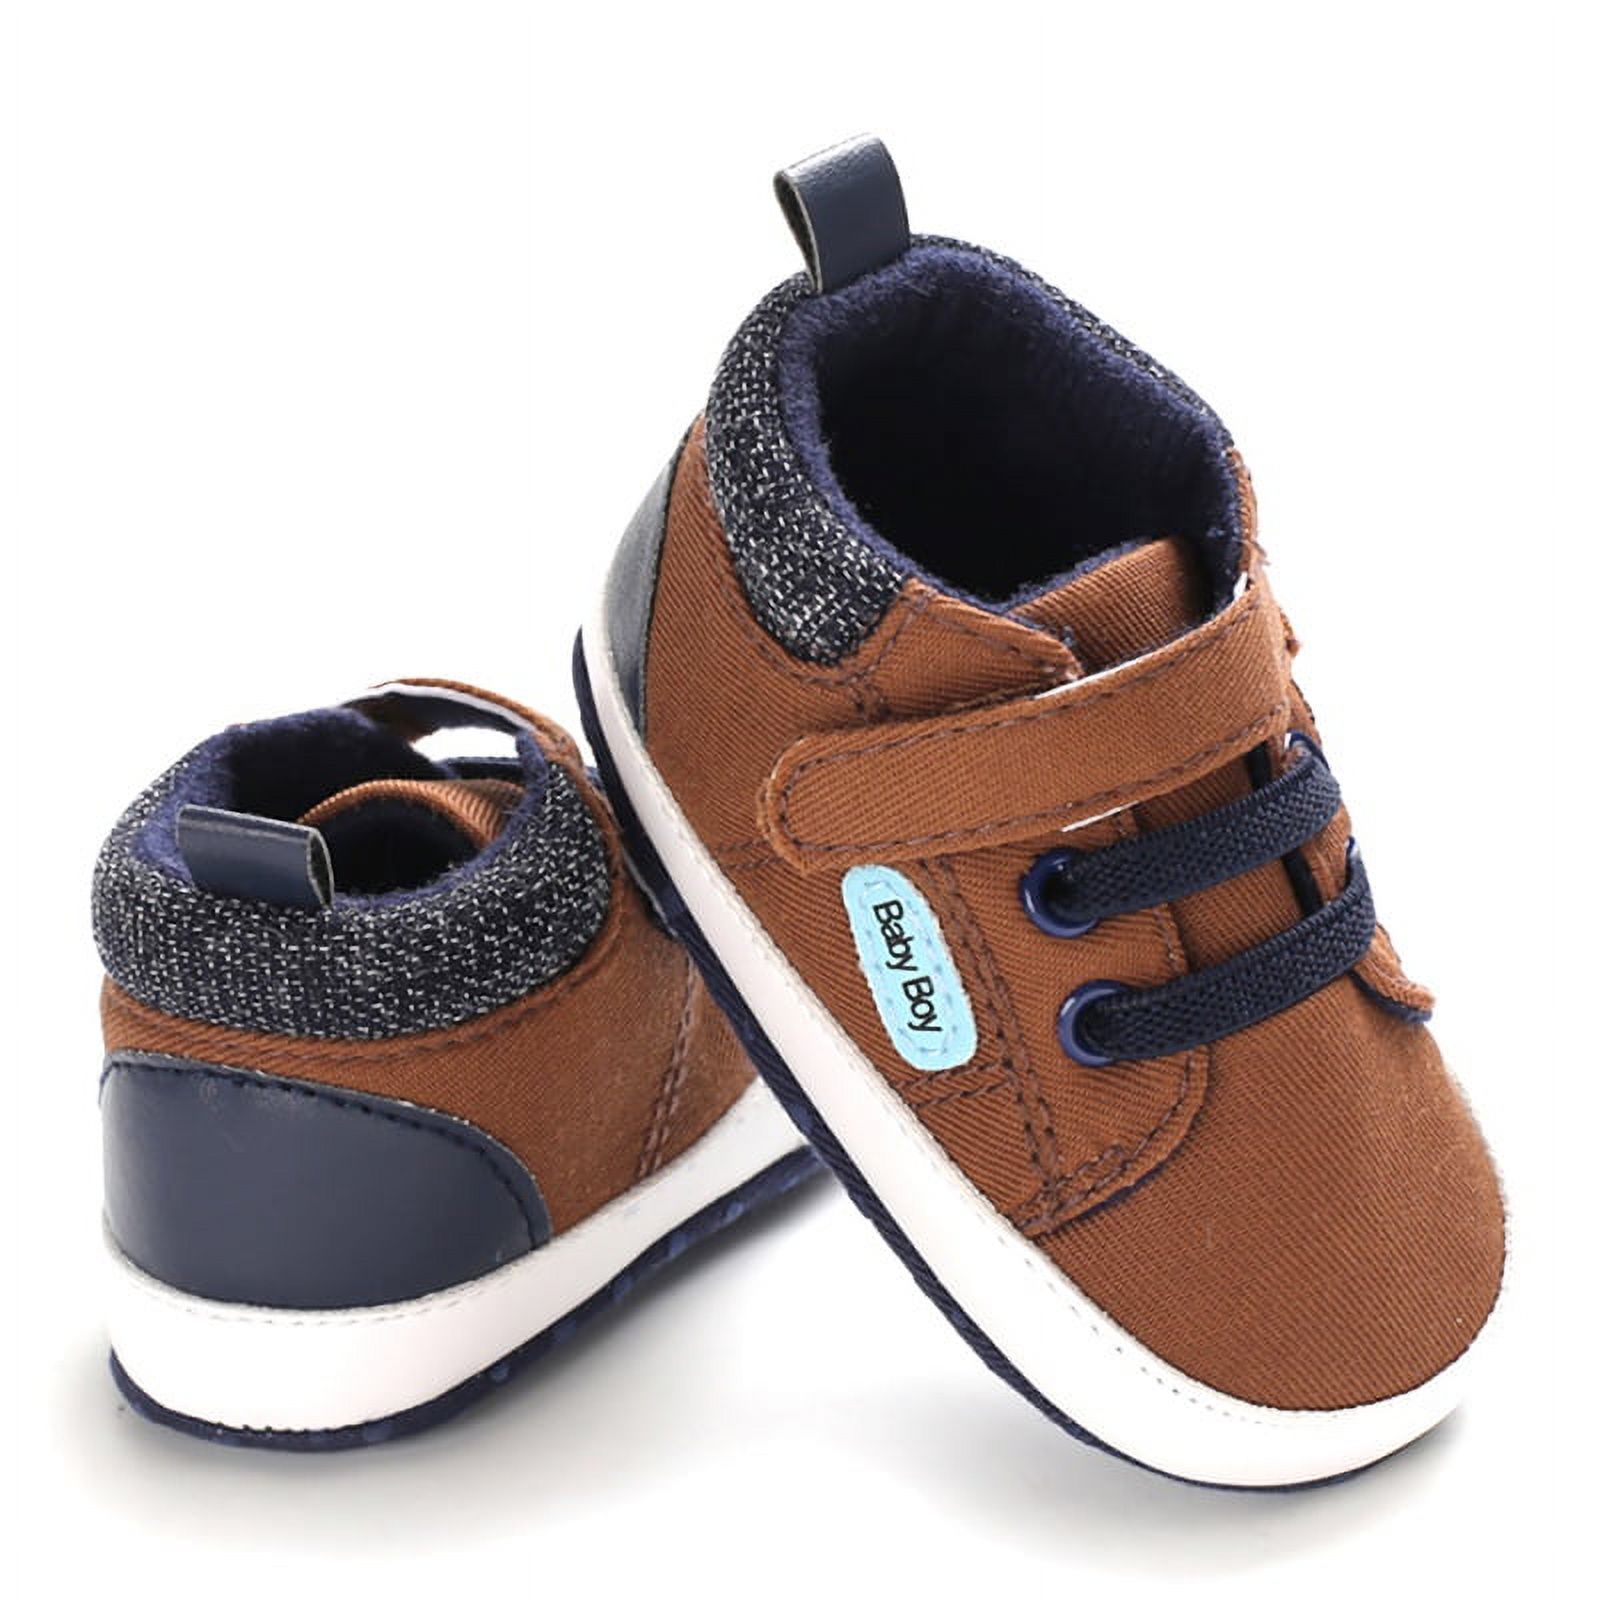 Infant Baby Boys Girls Canvas Toddler Sneakers Rubber Sole Non-Slip Candy Shoes First Walkers Prewalker Crib Shoes - image 4 of 8